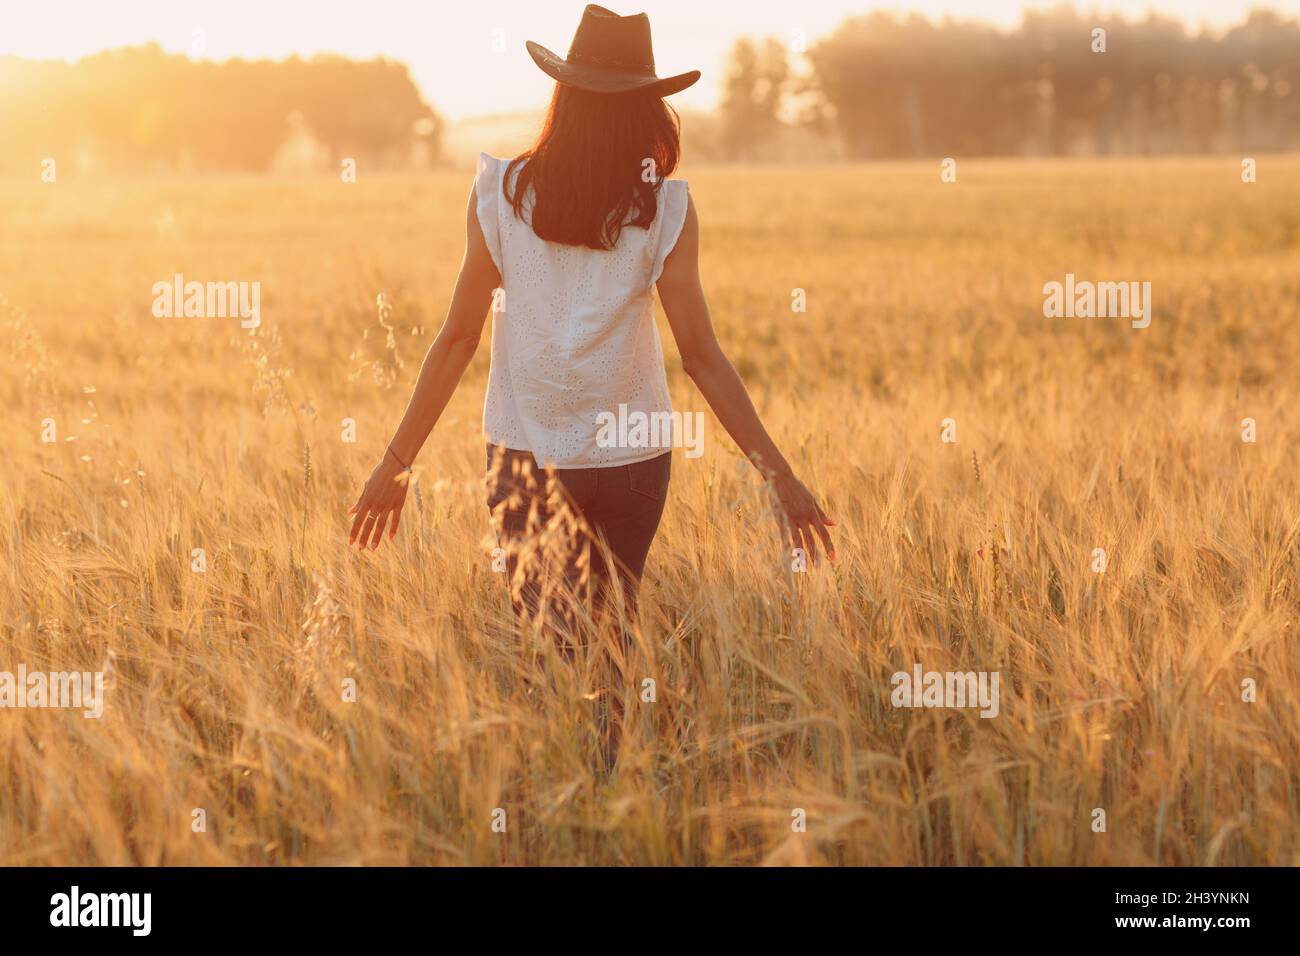 Woman farmer in cowboy hat walking with hands on ears at agricultural wheat field on sunset Stock Photo